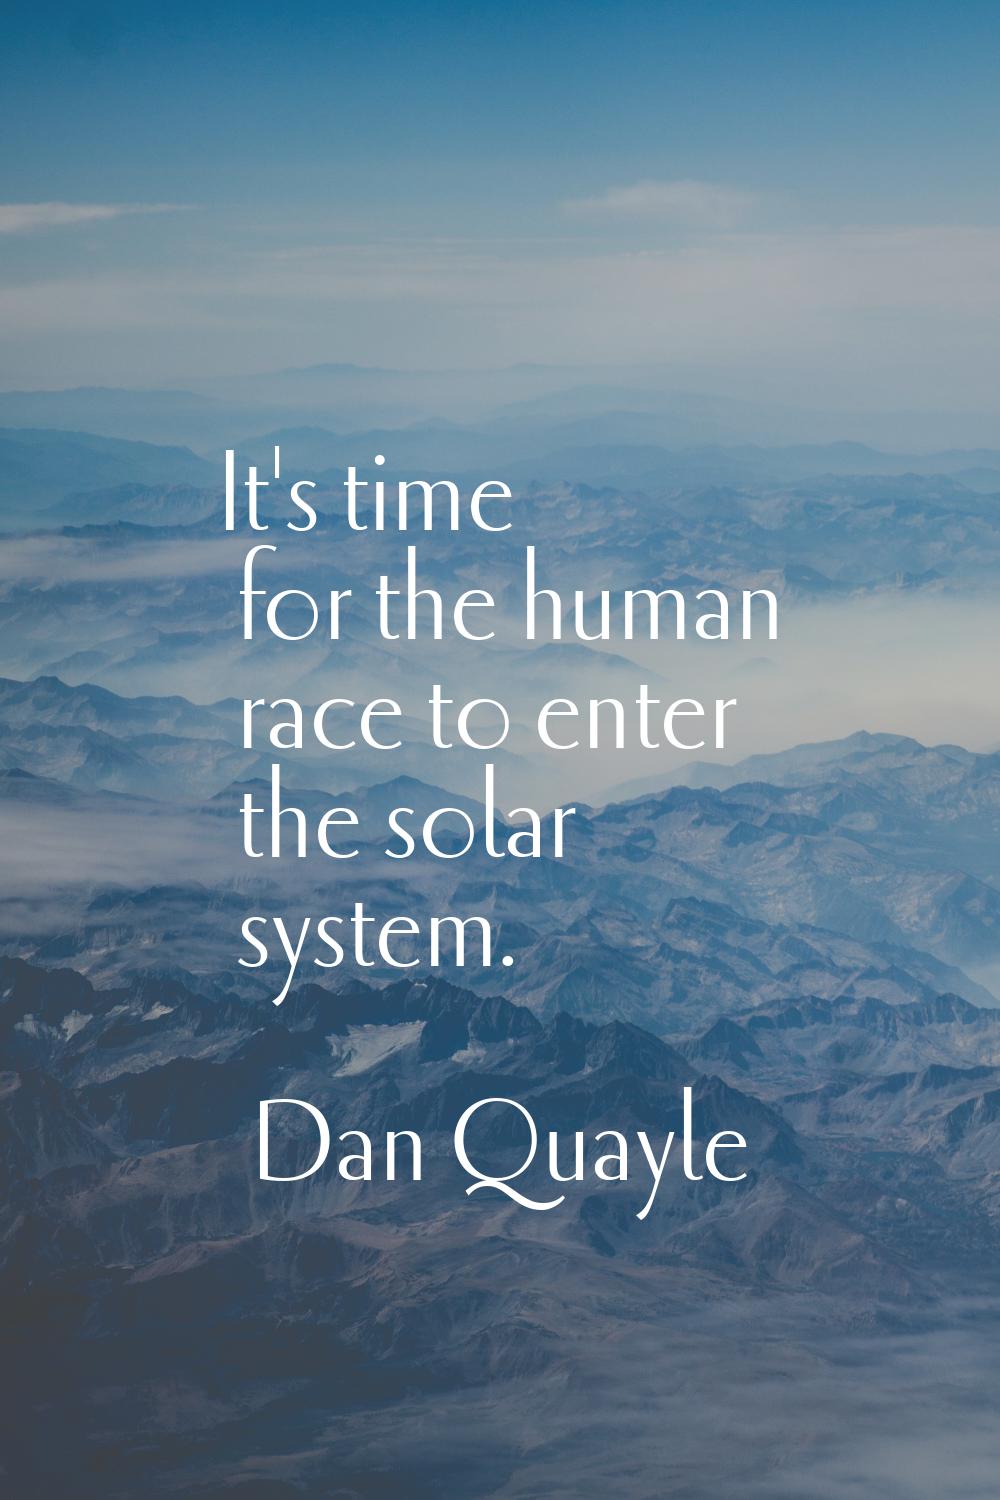 It's time for the human race to enter the solar system.